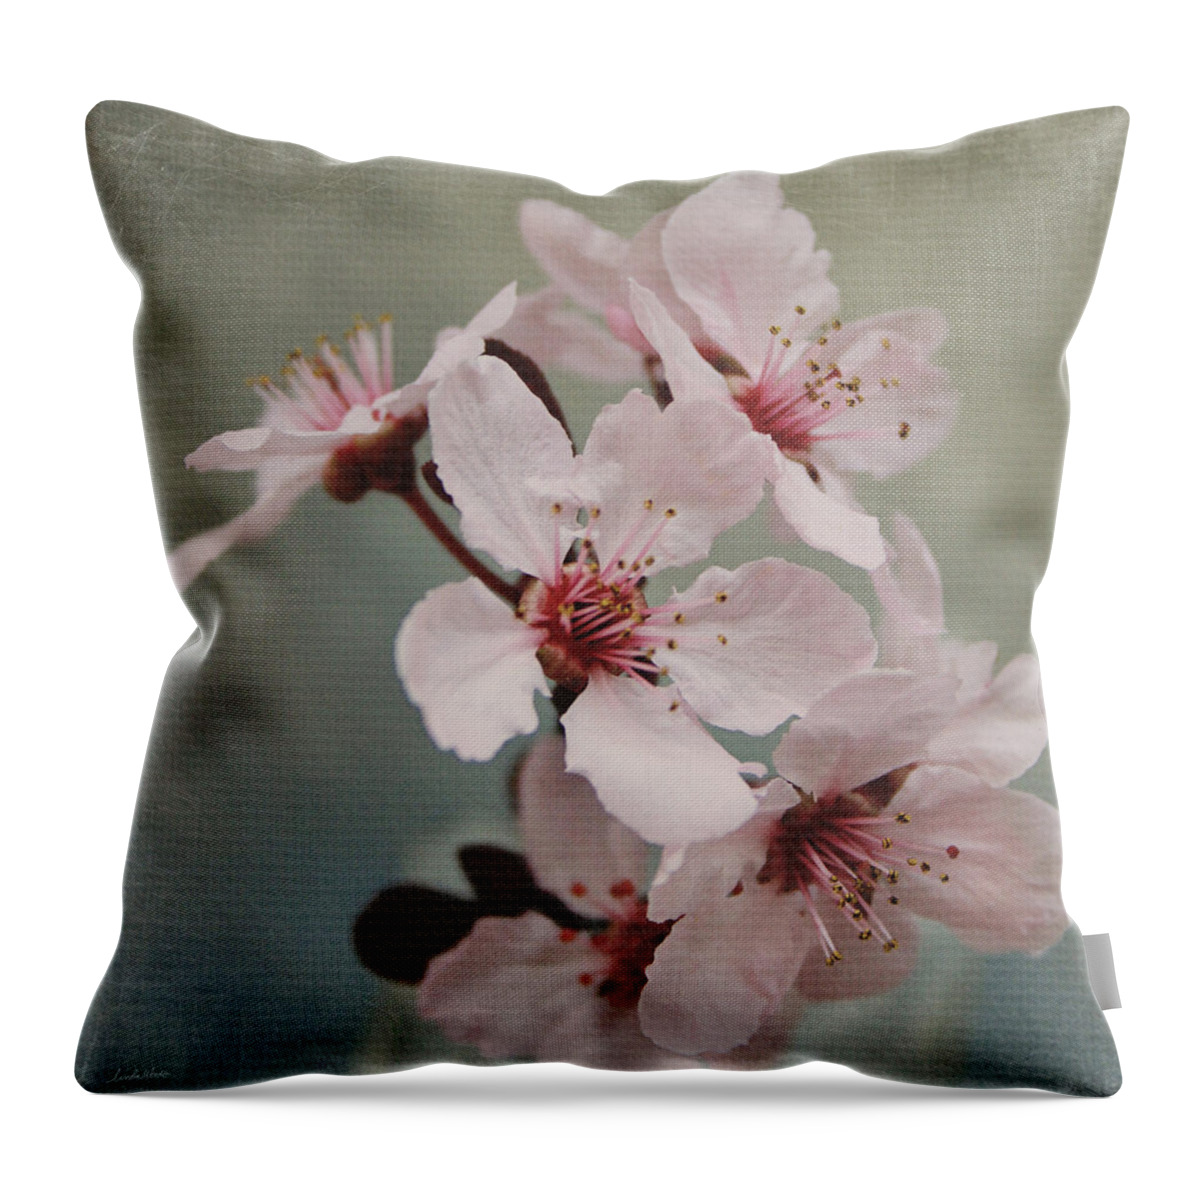 Flowers Throw Pillow featuring the mixed media Pink Blossoms 2- Art by Linda Woods by Linda Woods